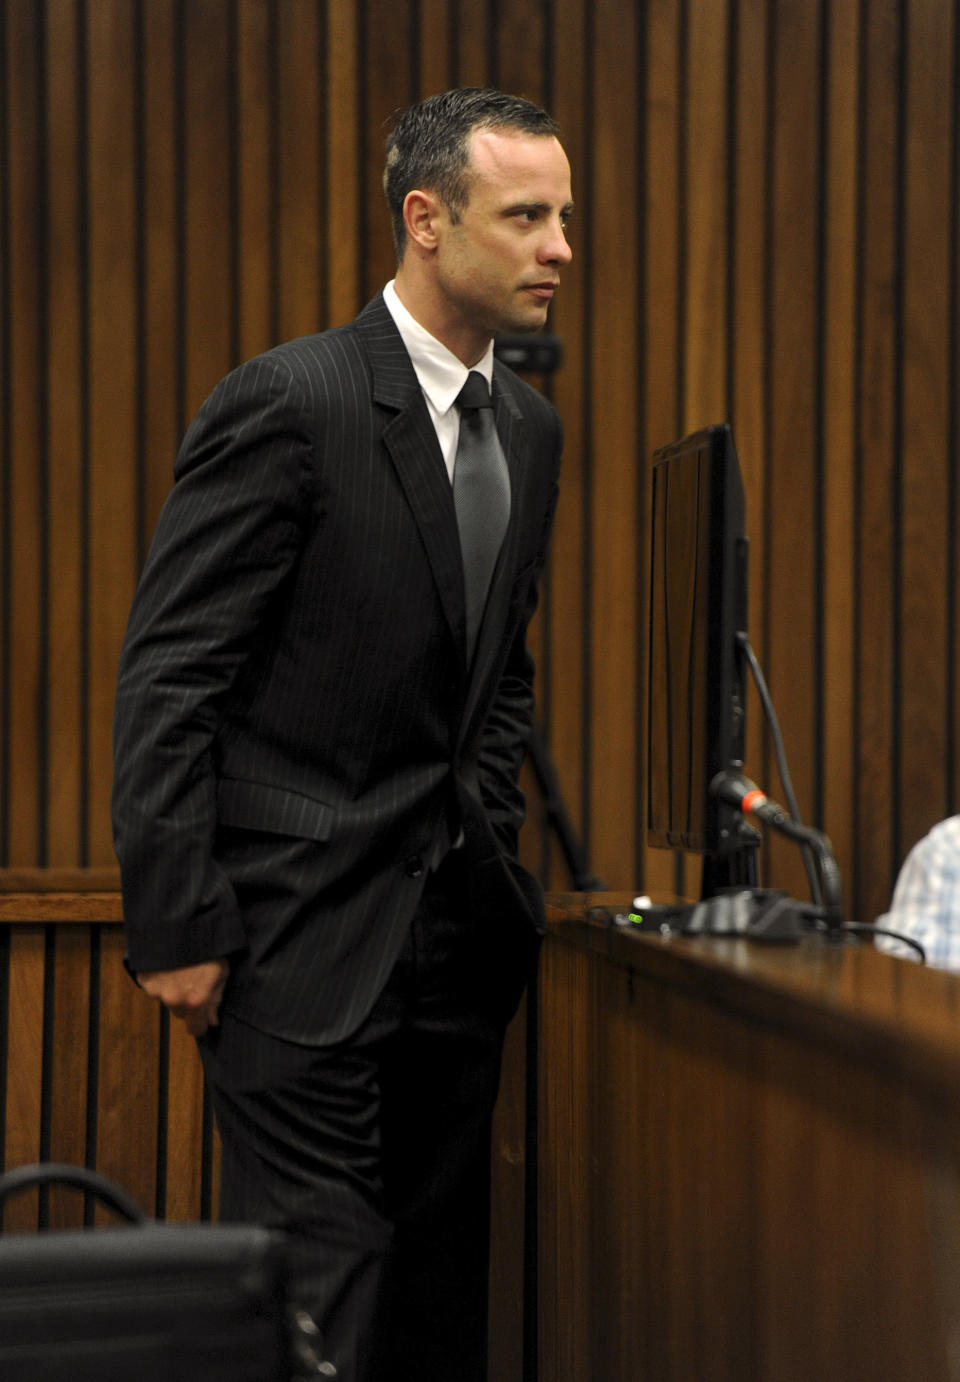 Oscar Pistorius, arrives in court of his murder trial in Pretoria, South Africa, Tuesday, March 18, 2014. Pistorius is on trial for the murder of his girlfriend Reeva Steenkamp on Valentines Day, 2013. (AP Photo/Werner Beukes, Pool)